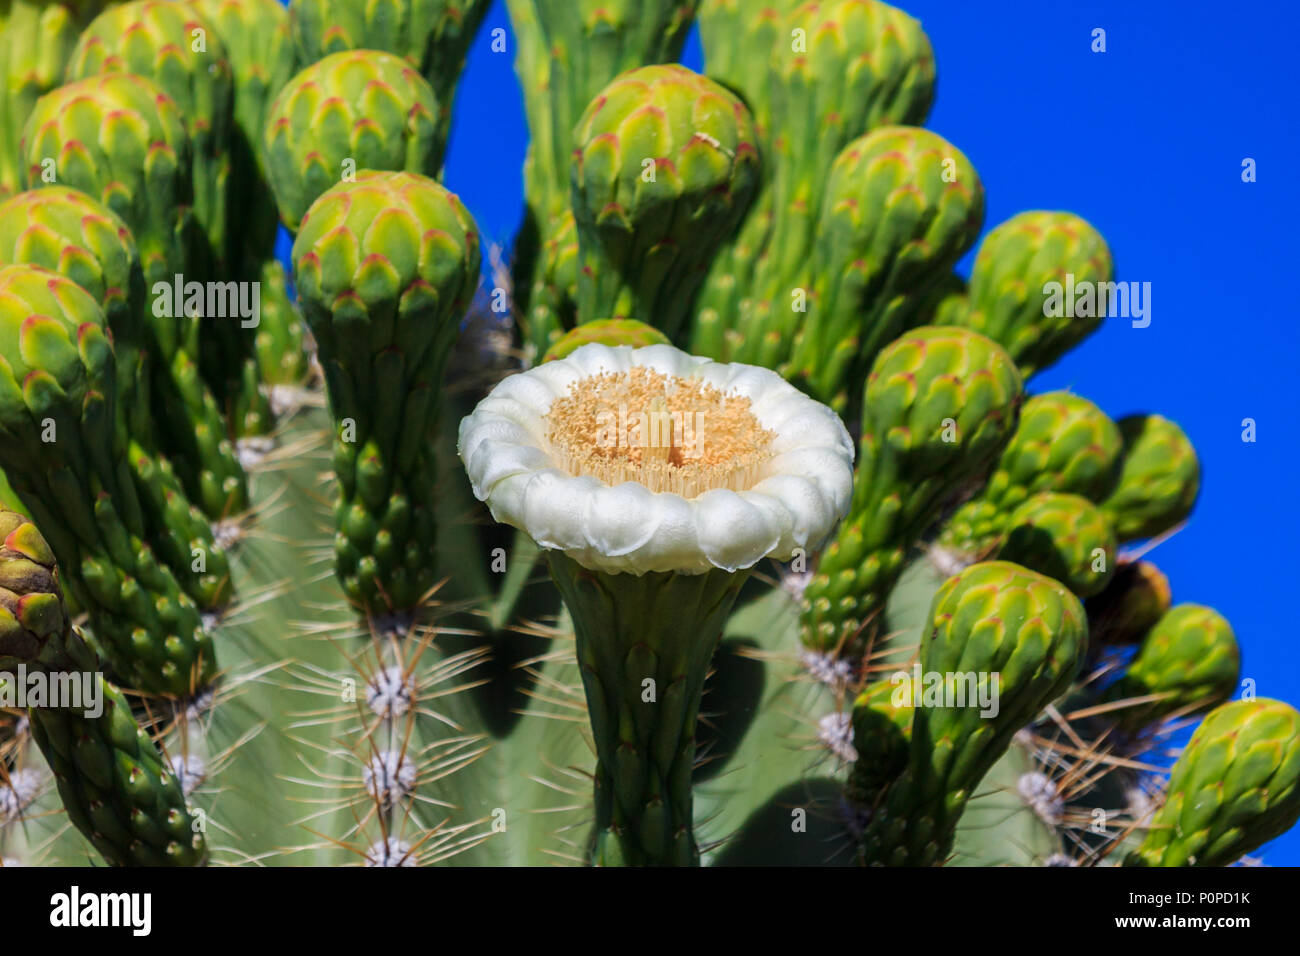 A single white flower blooms on top of  a giant saguaro cactus (carnegiea gigantea) in Arizona's Sonoran desert. Behind it are rows of unopened flower Stock Photo